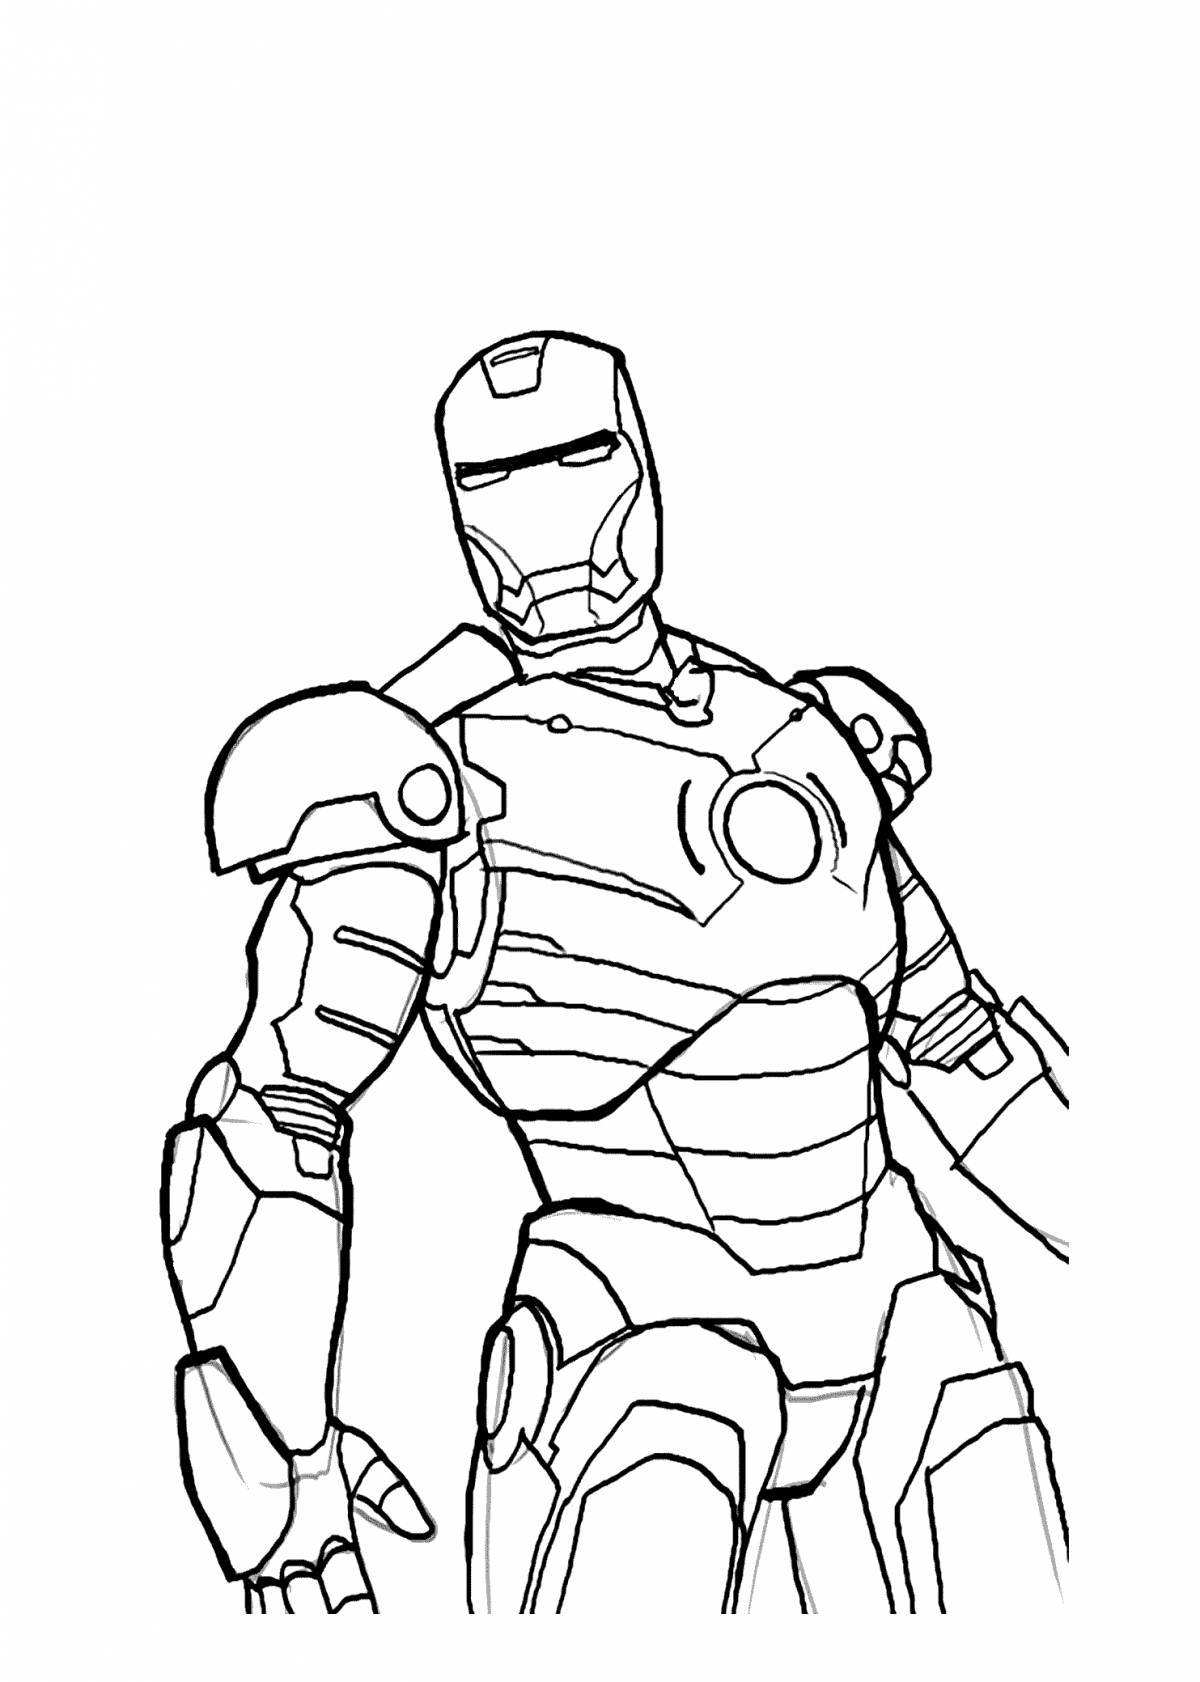 Amazing superhero coloring pages for boys